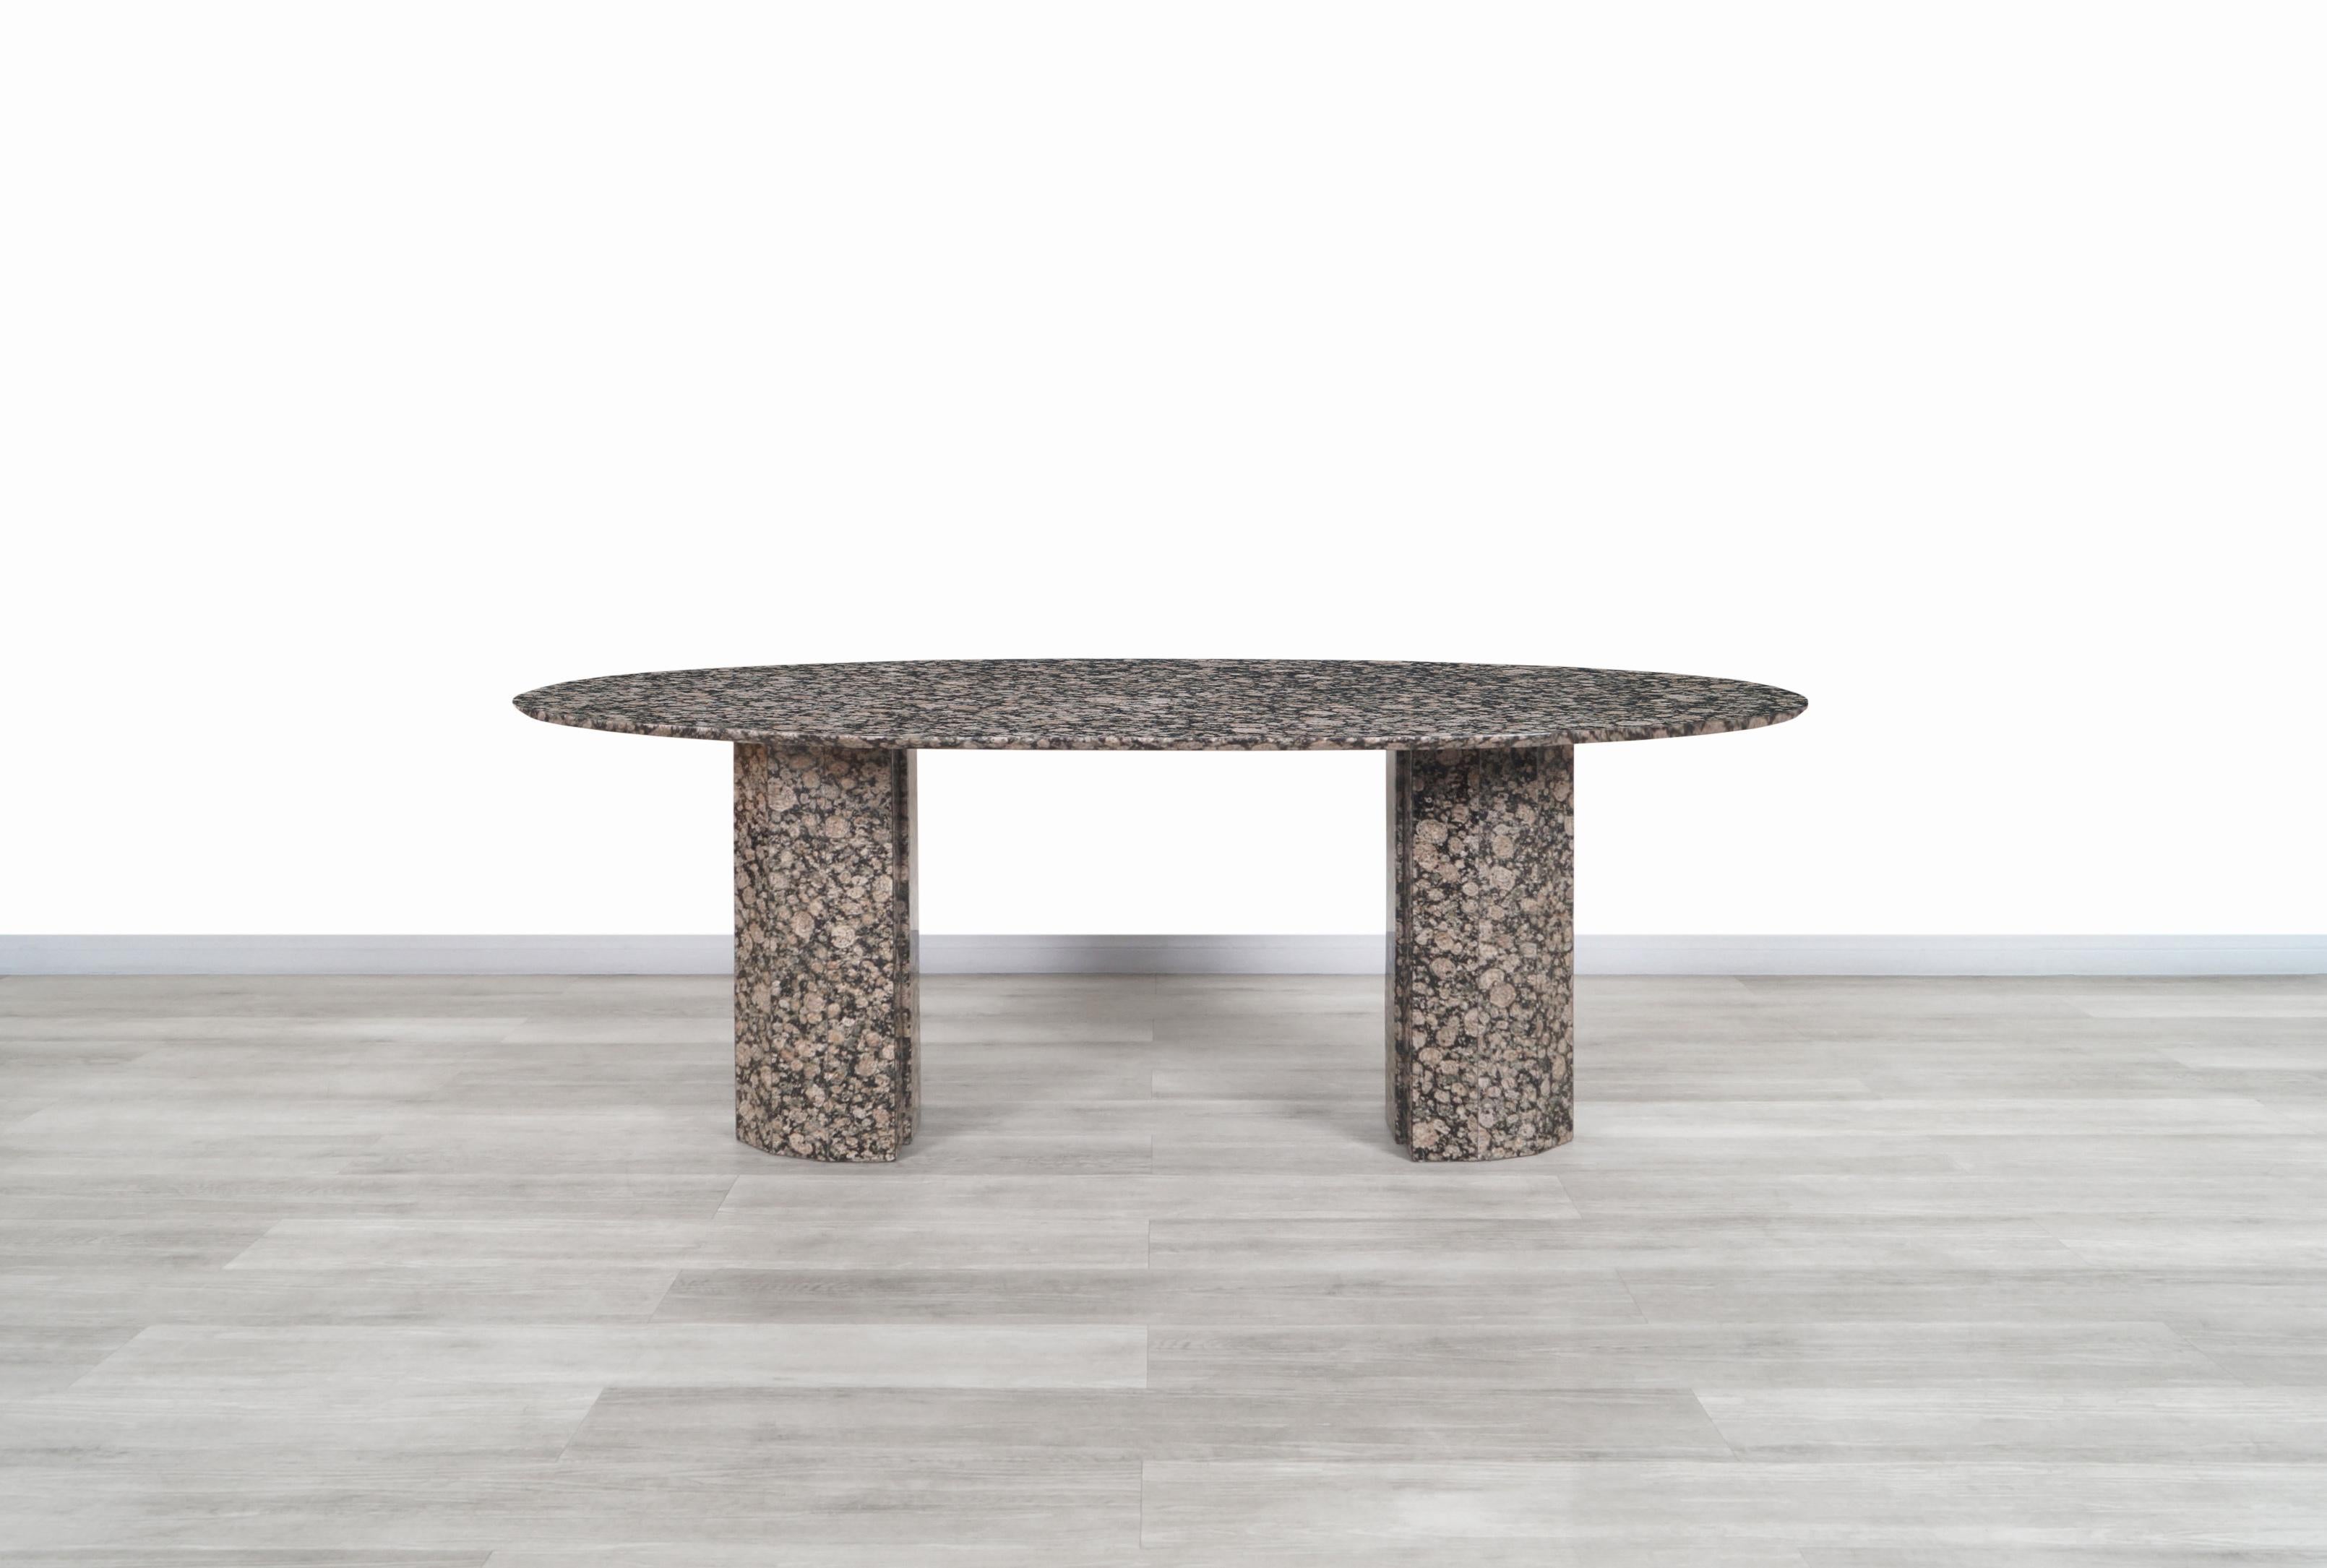 Stunning vintage Italian granite oval dining table designed and manufactured in Italy, circa 1980s. This table is built from granite stone, where the minerals that compose this stone shine through the entire table, giving it a fantastic contrast of